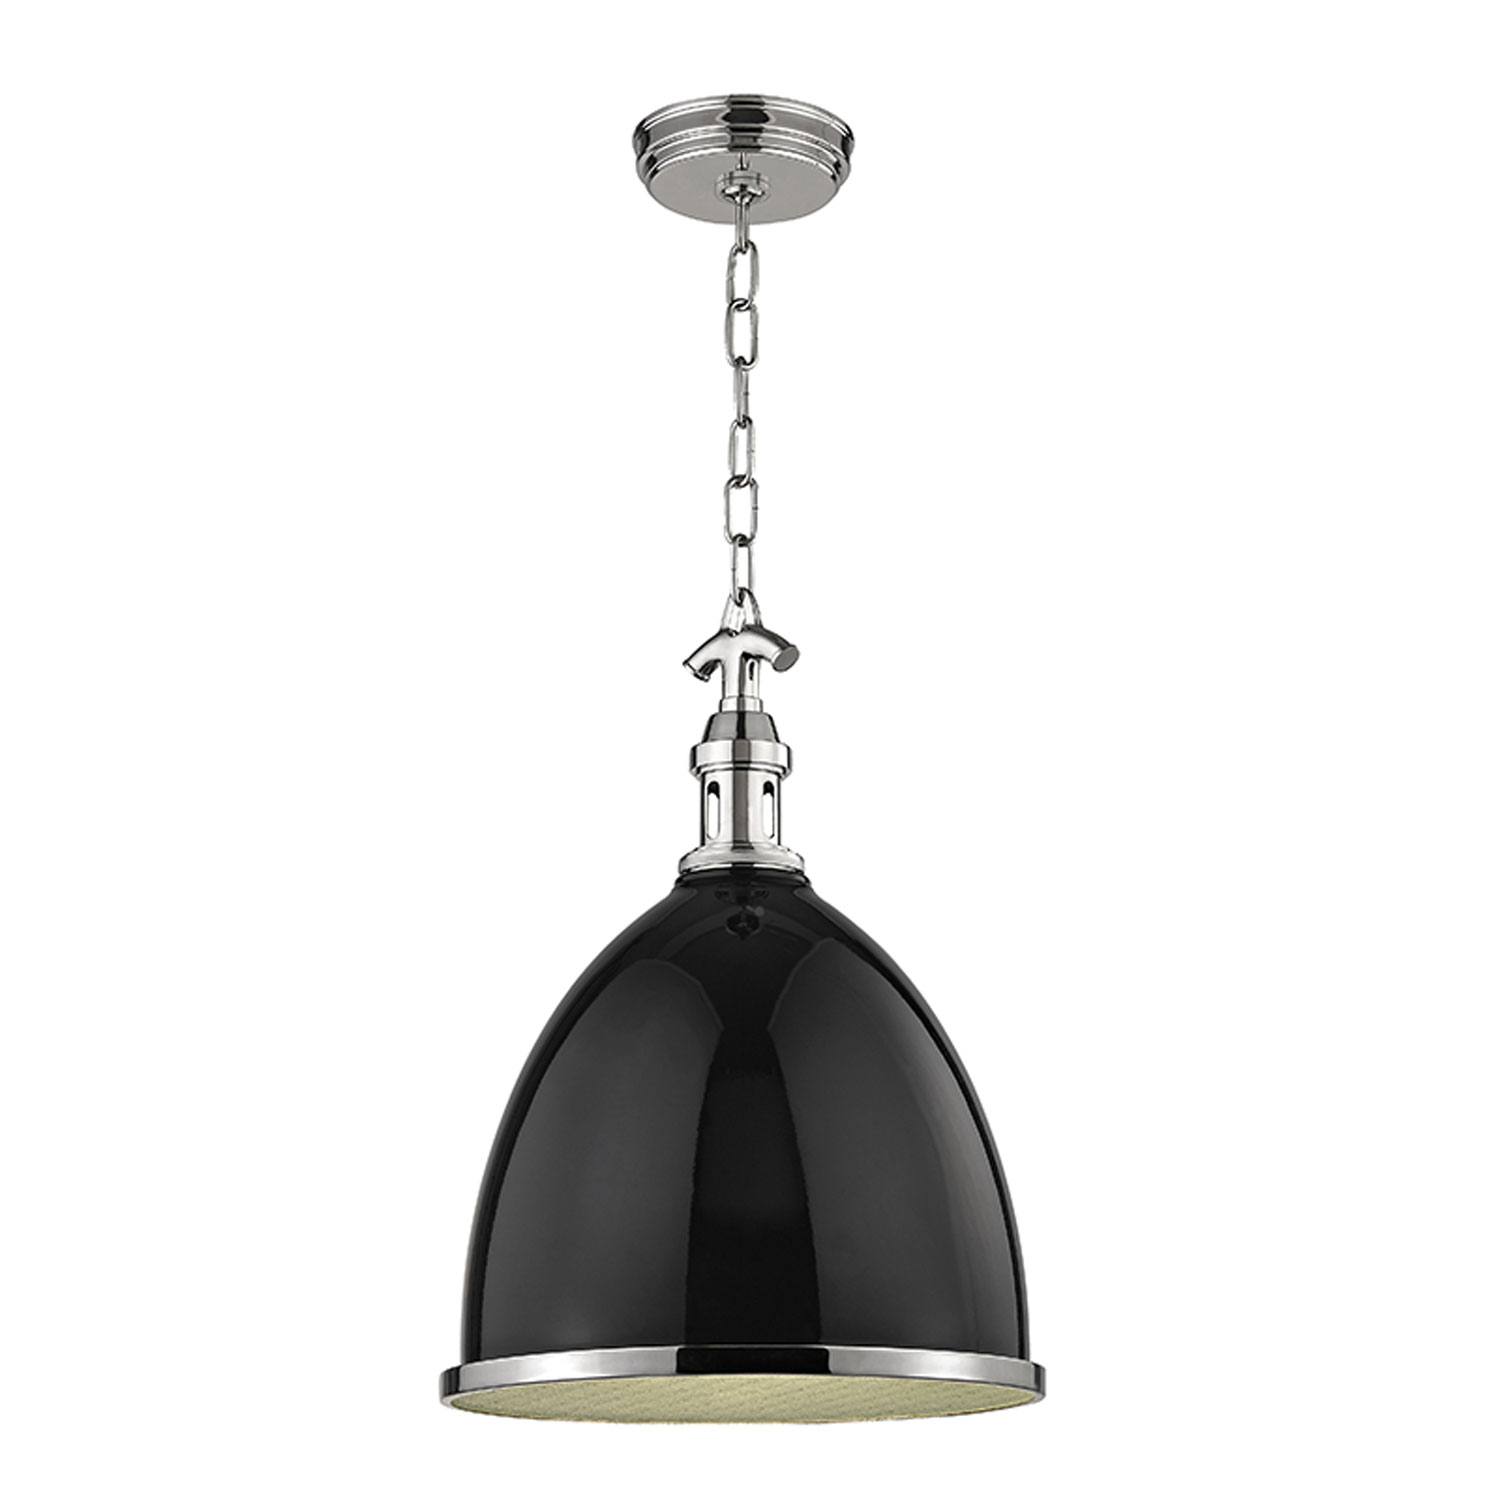 Viceroy Black With Polished Nickel Thirteen-Inch Mini Pendant